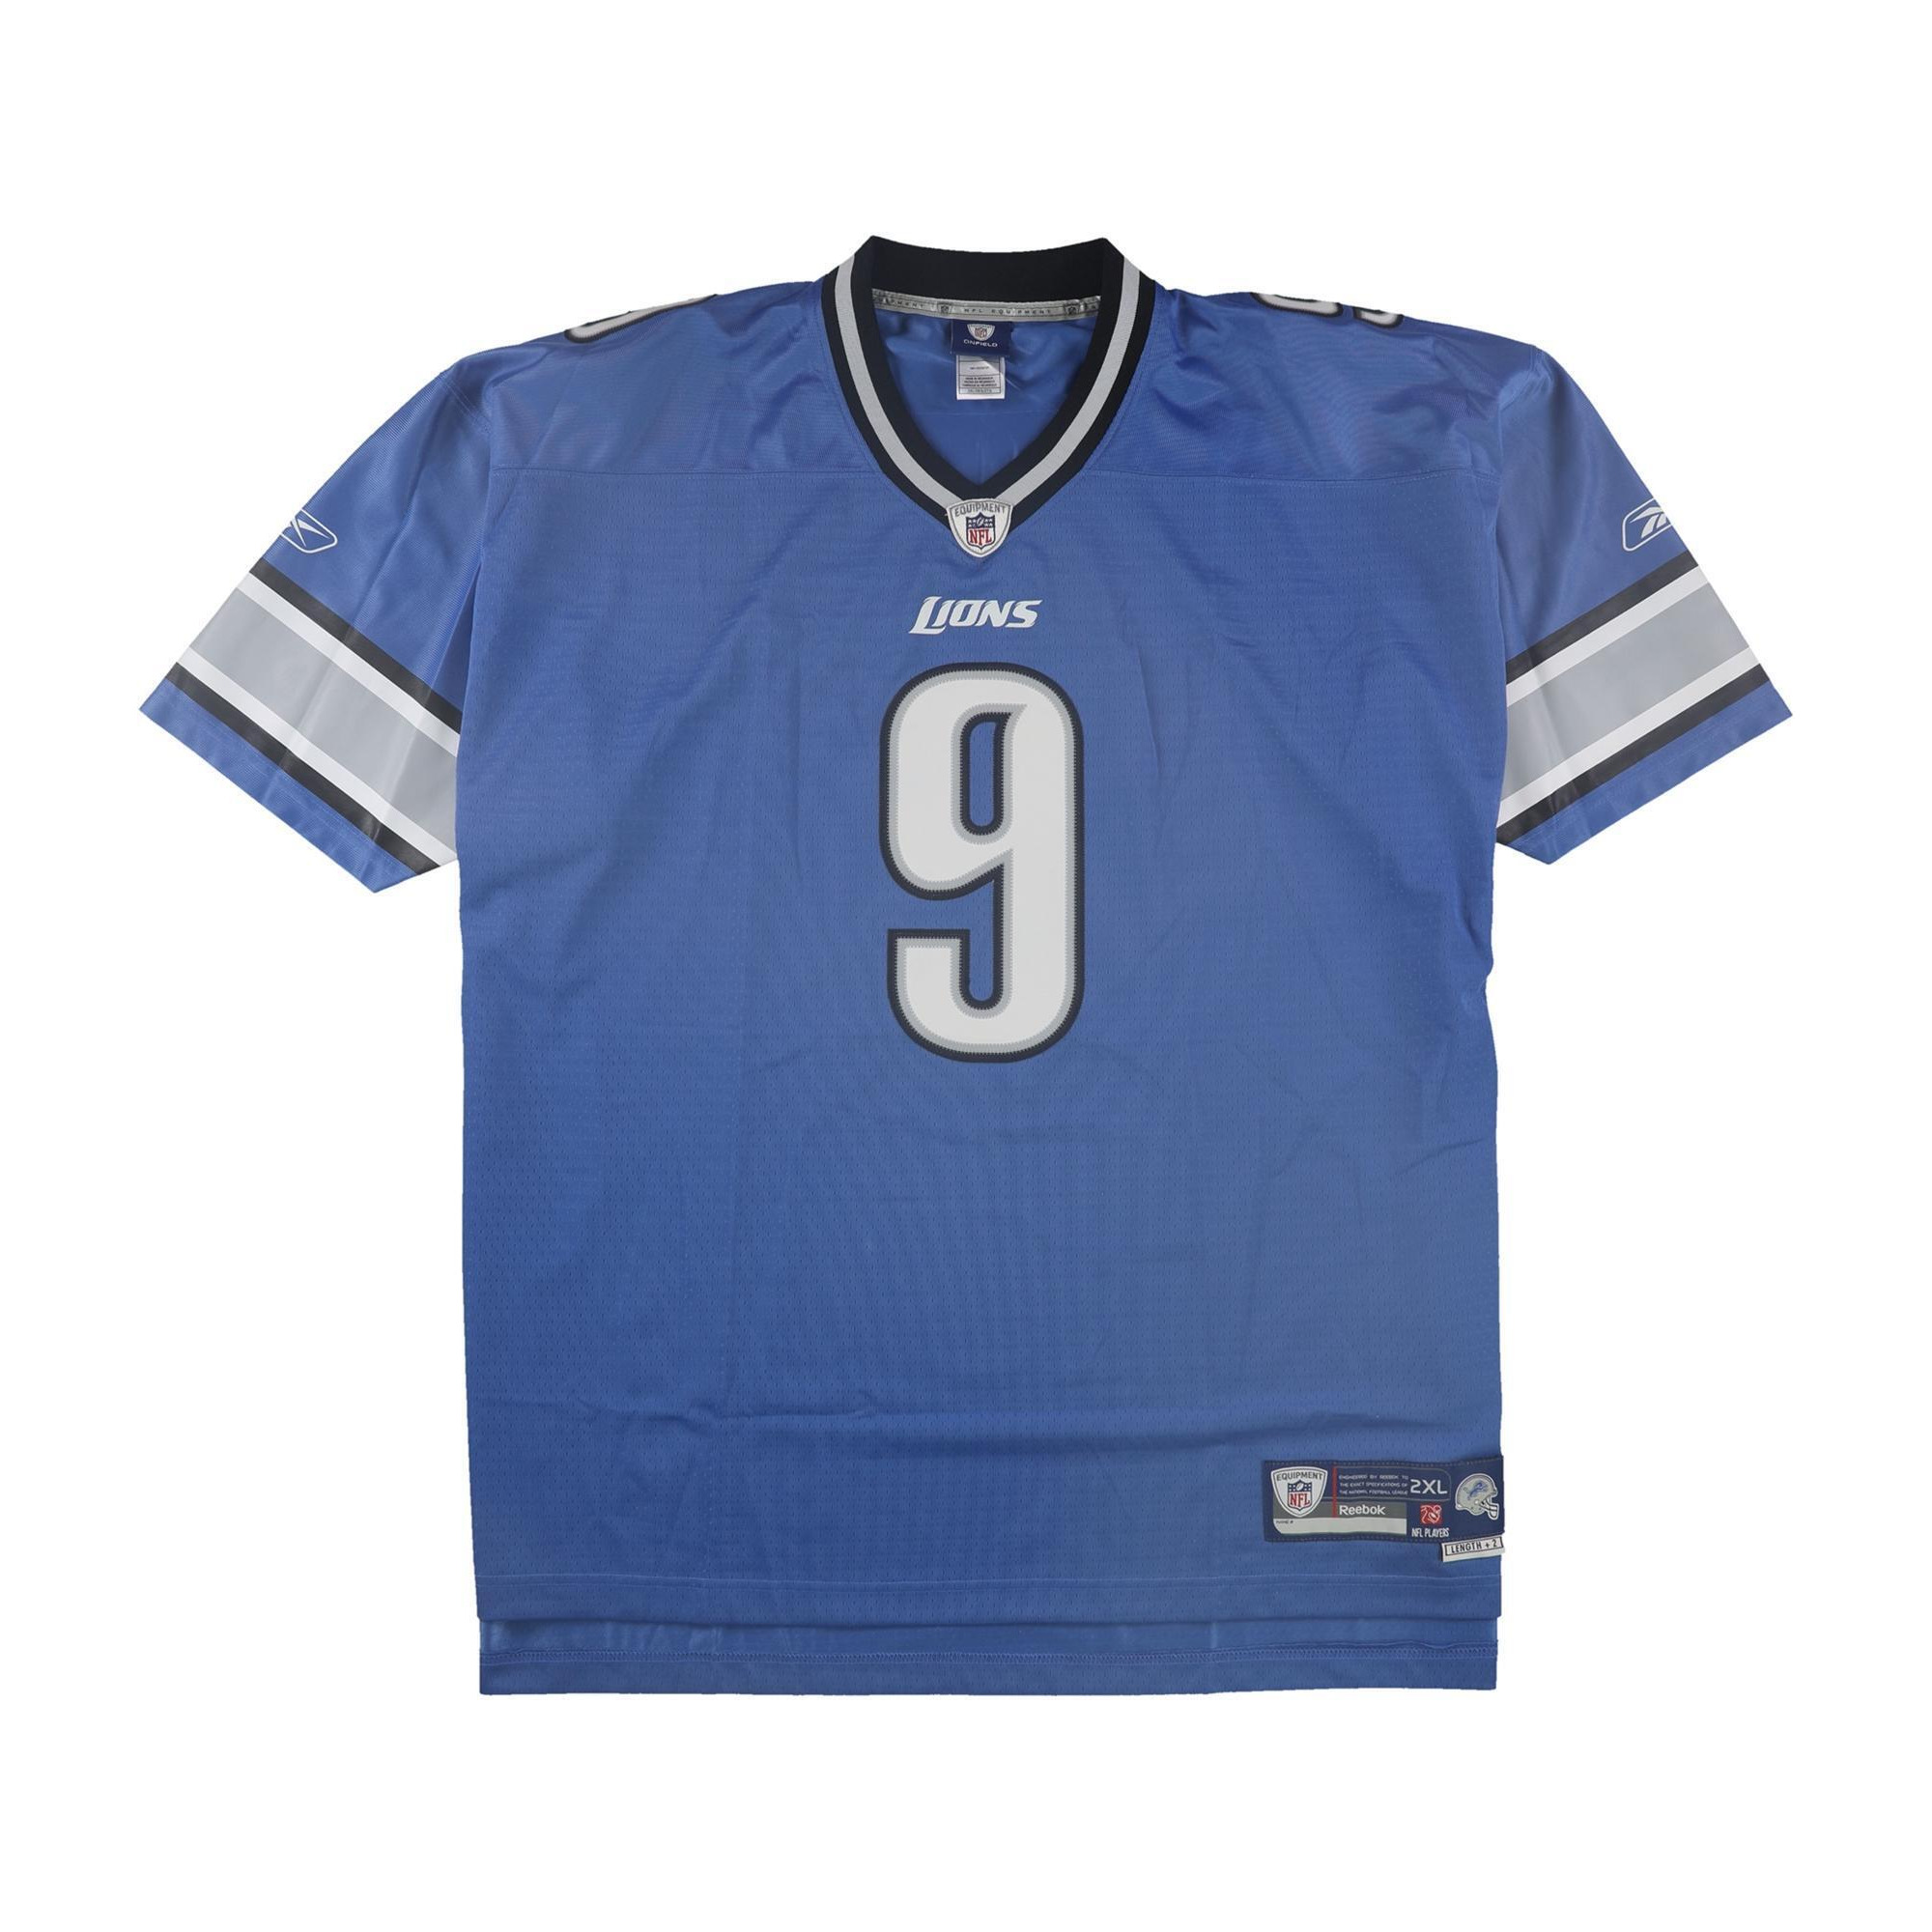 ONFIELD Mens Detroit Lions #9 Jersey, Style # 7048A-1 alternate image